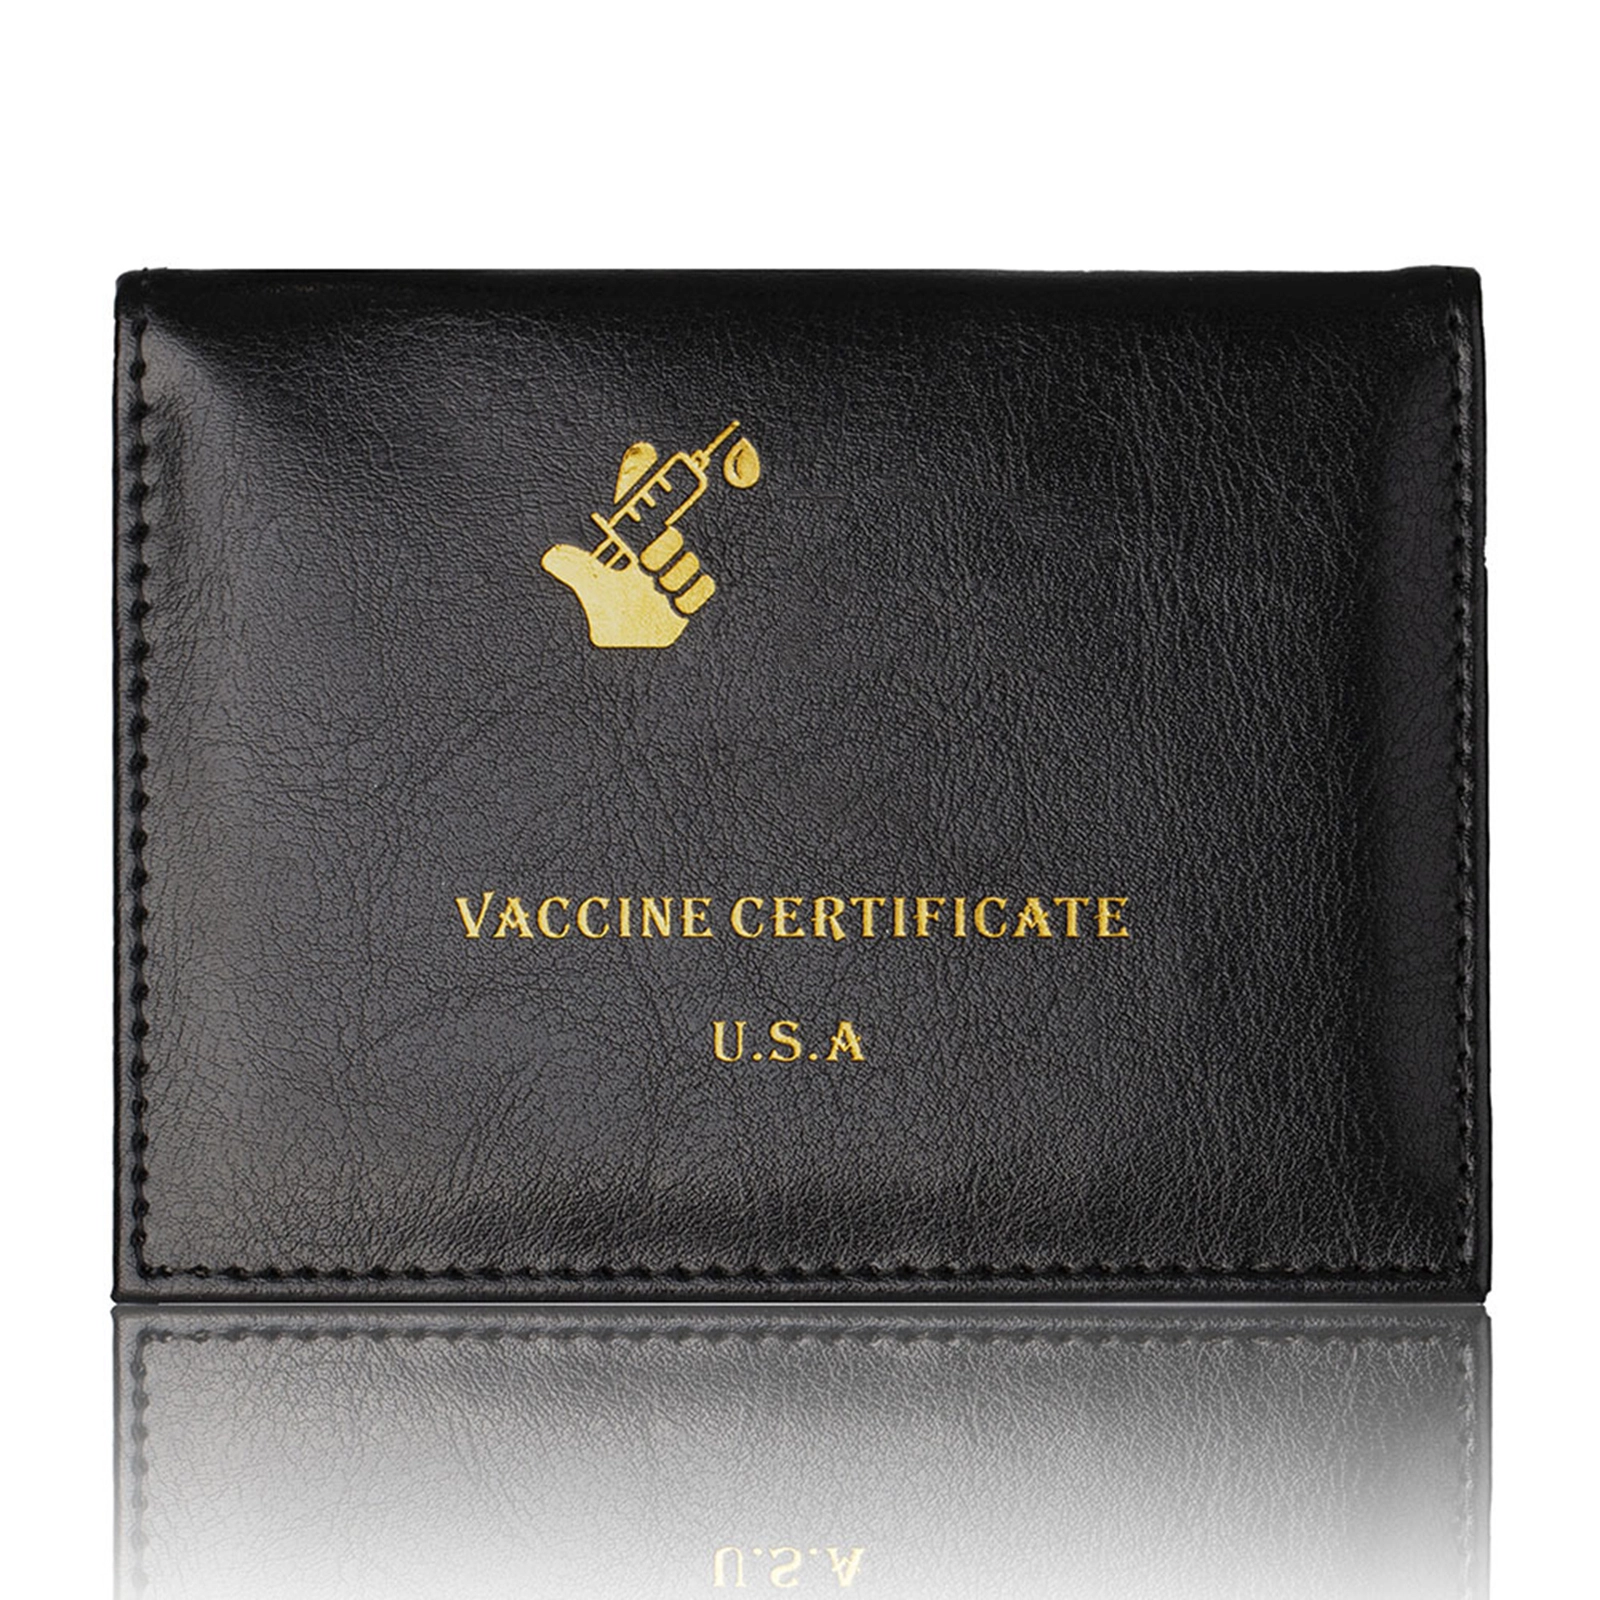 Multifunction Card Protector Registration Insurance Driving Documents Credit Cards PU Leather Holder Cover 5